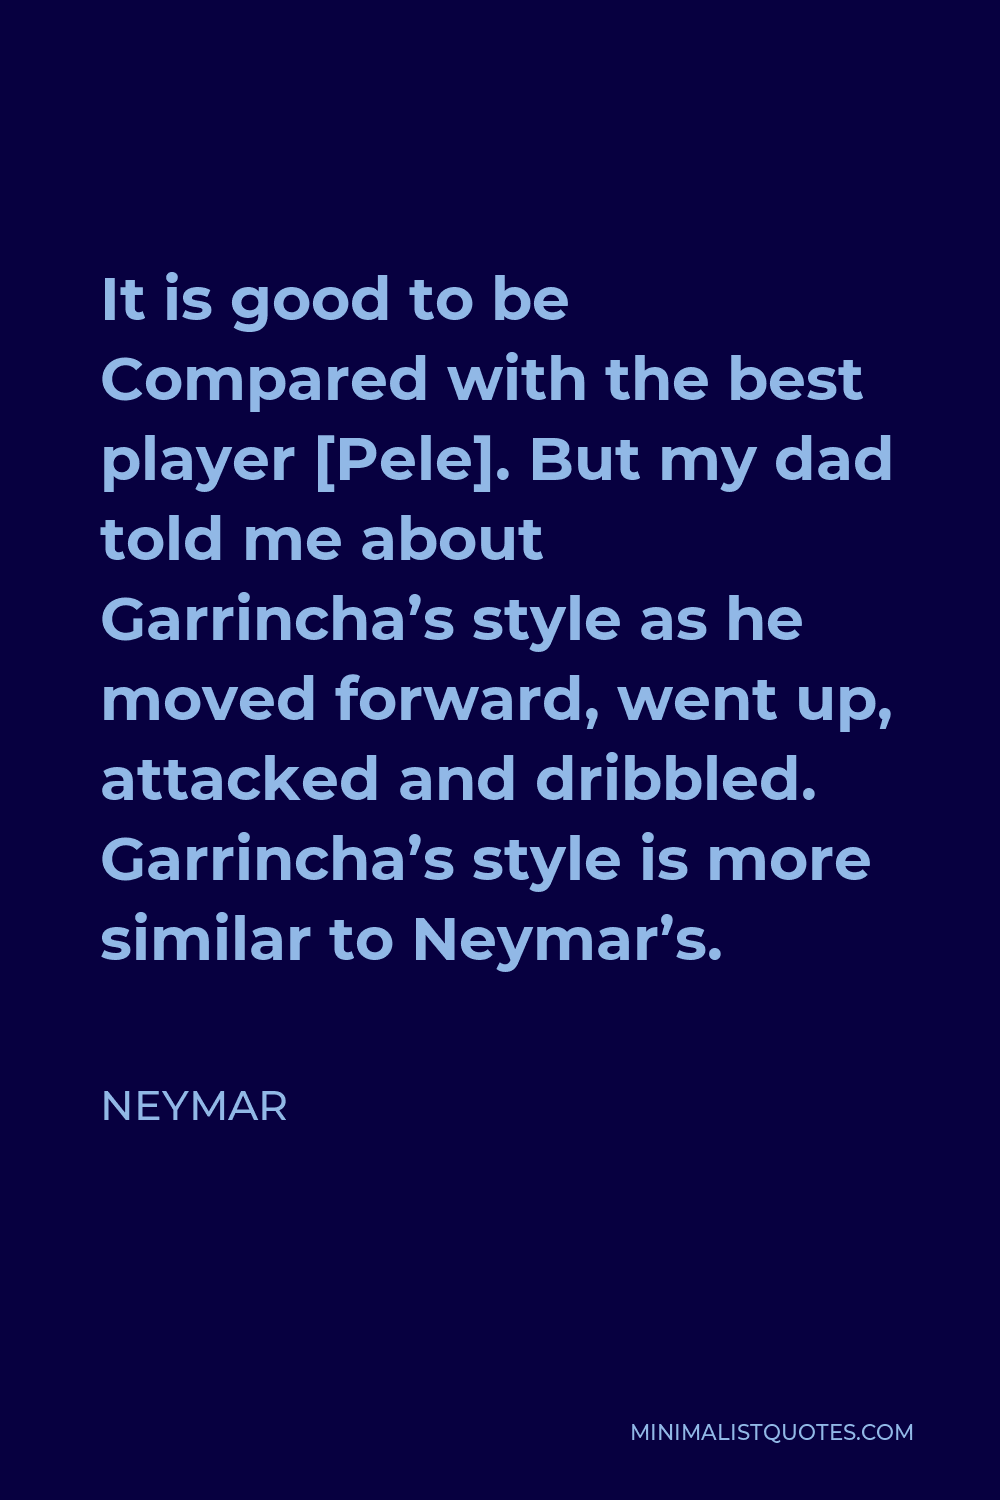 Neymar Quote - It is good to be Compared with the best player [Pele]. But my dad told me about Garrincha’s style as he moved forward, went up, attacked and dribbled. Garrincha’s style is more similar to Neymar’s.